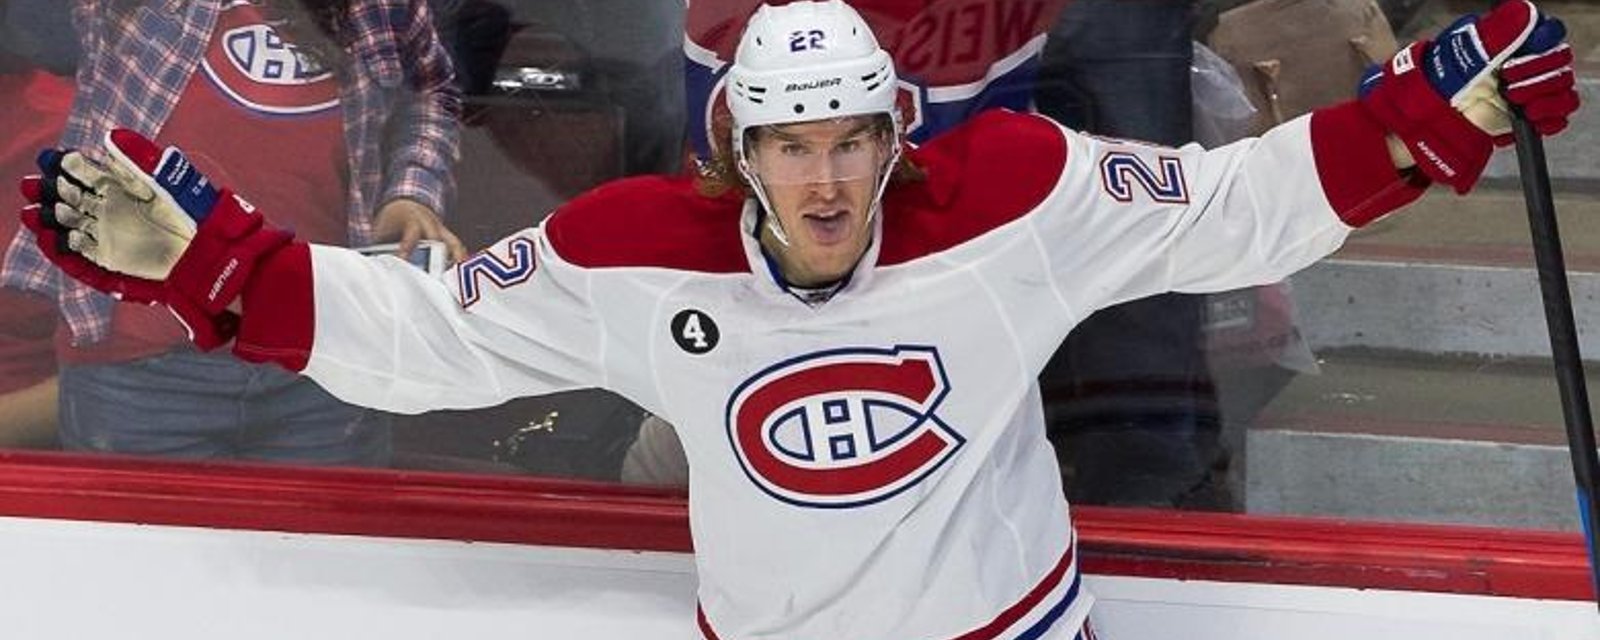 Habs want to bring back former forward, but have stiff competition from multiple teams.